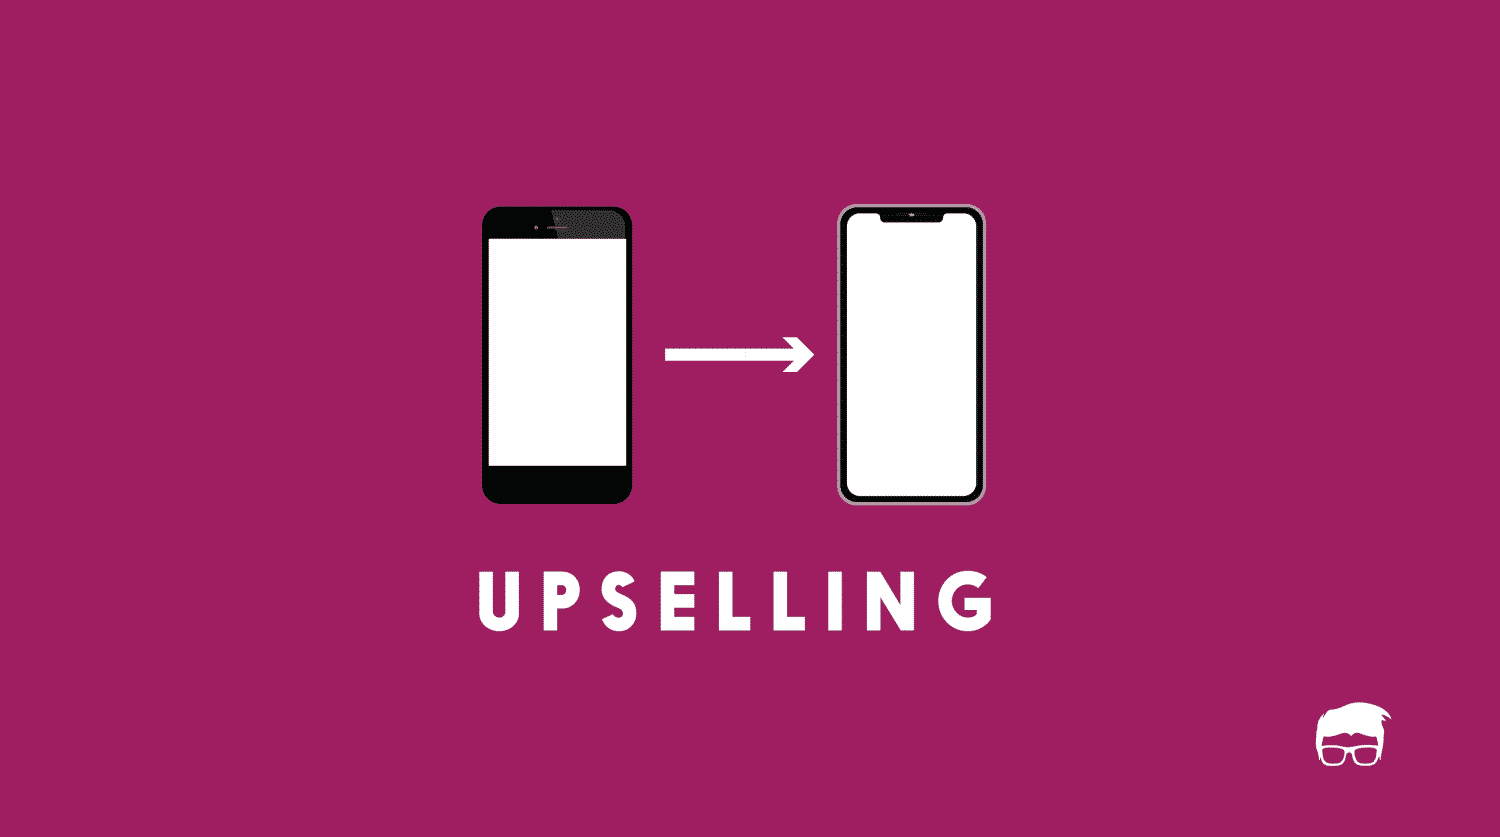 What Is Upselling? How To Upsell? [Detailed Guide]